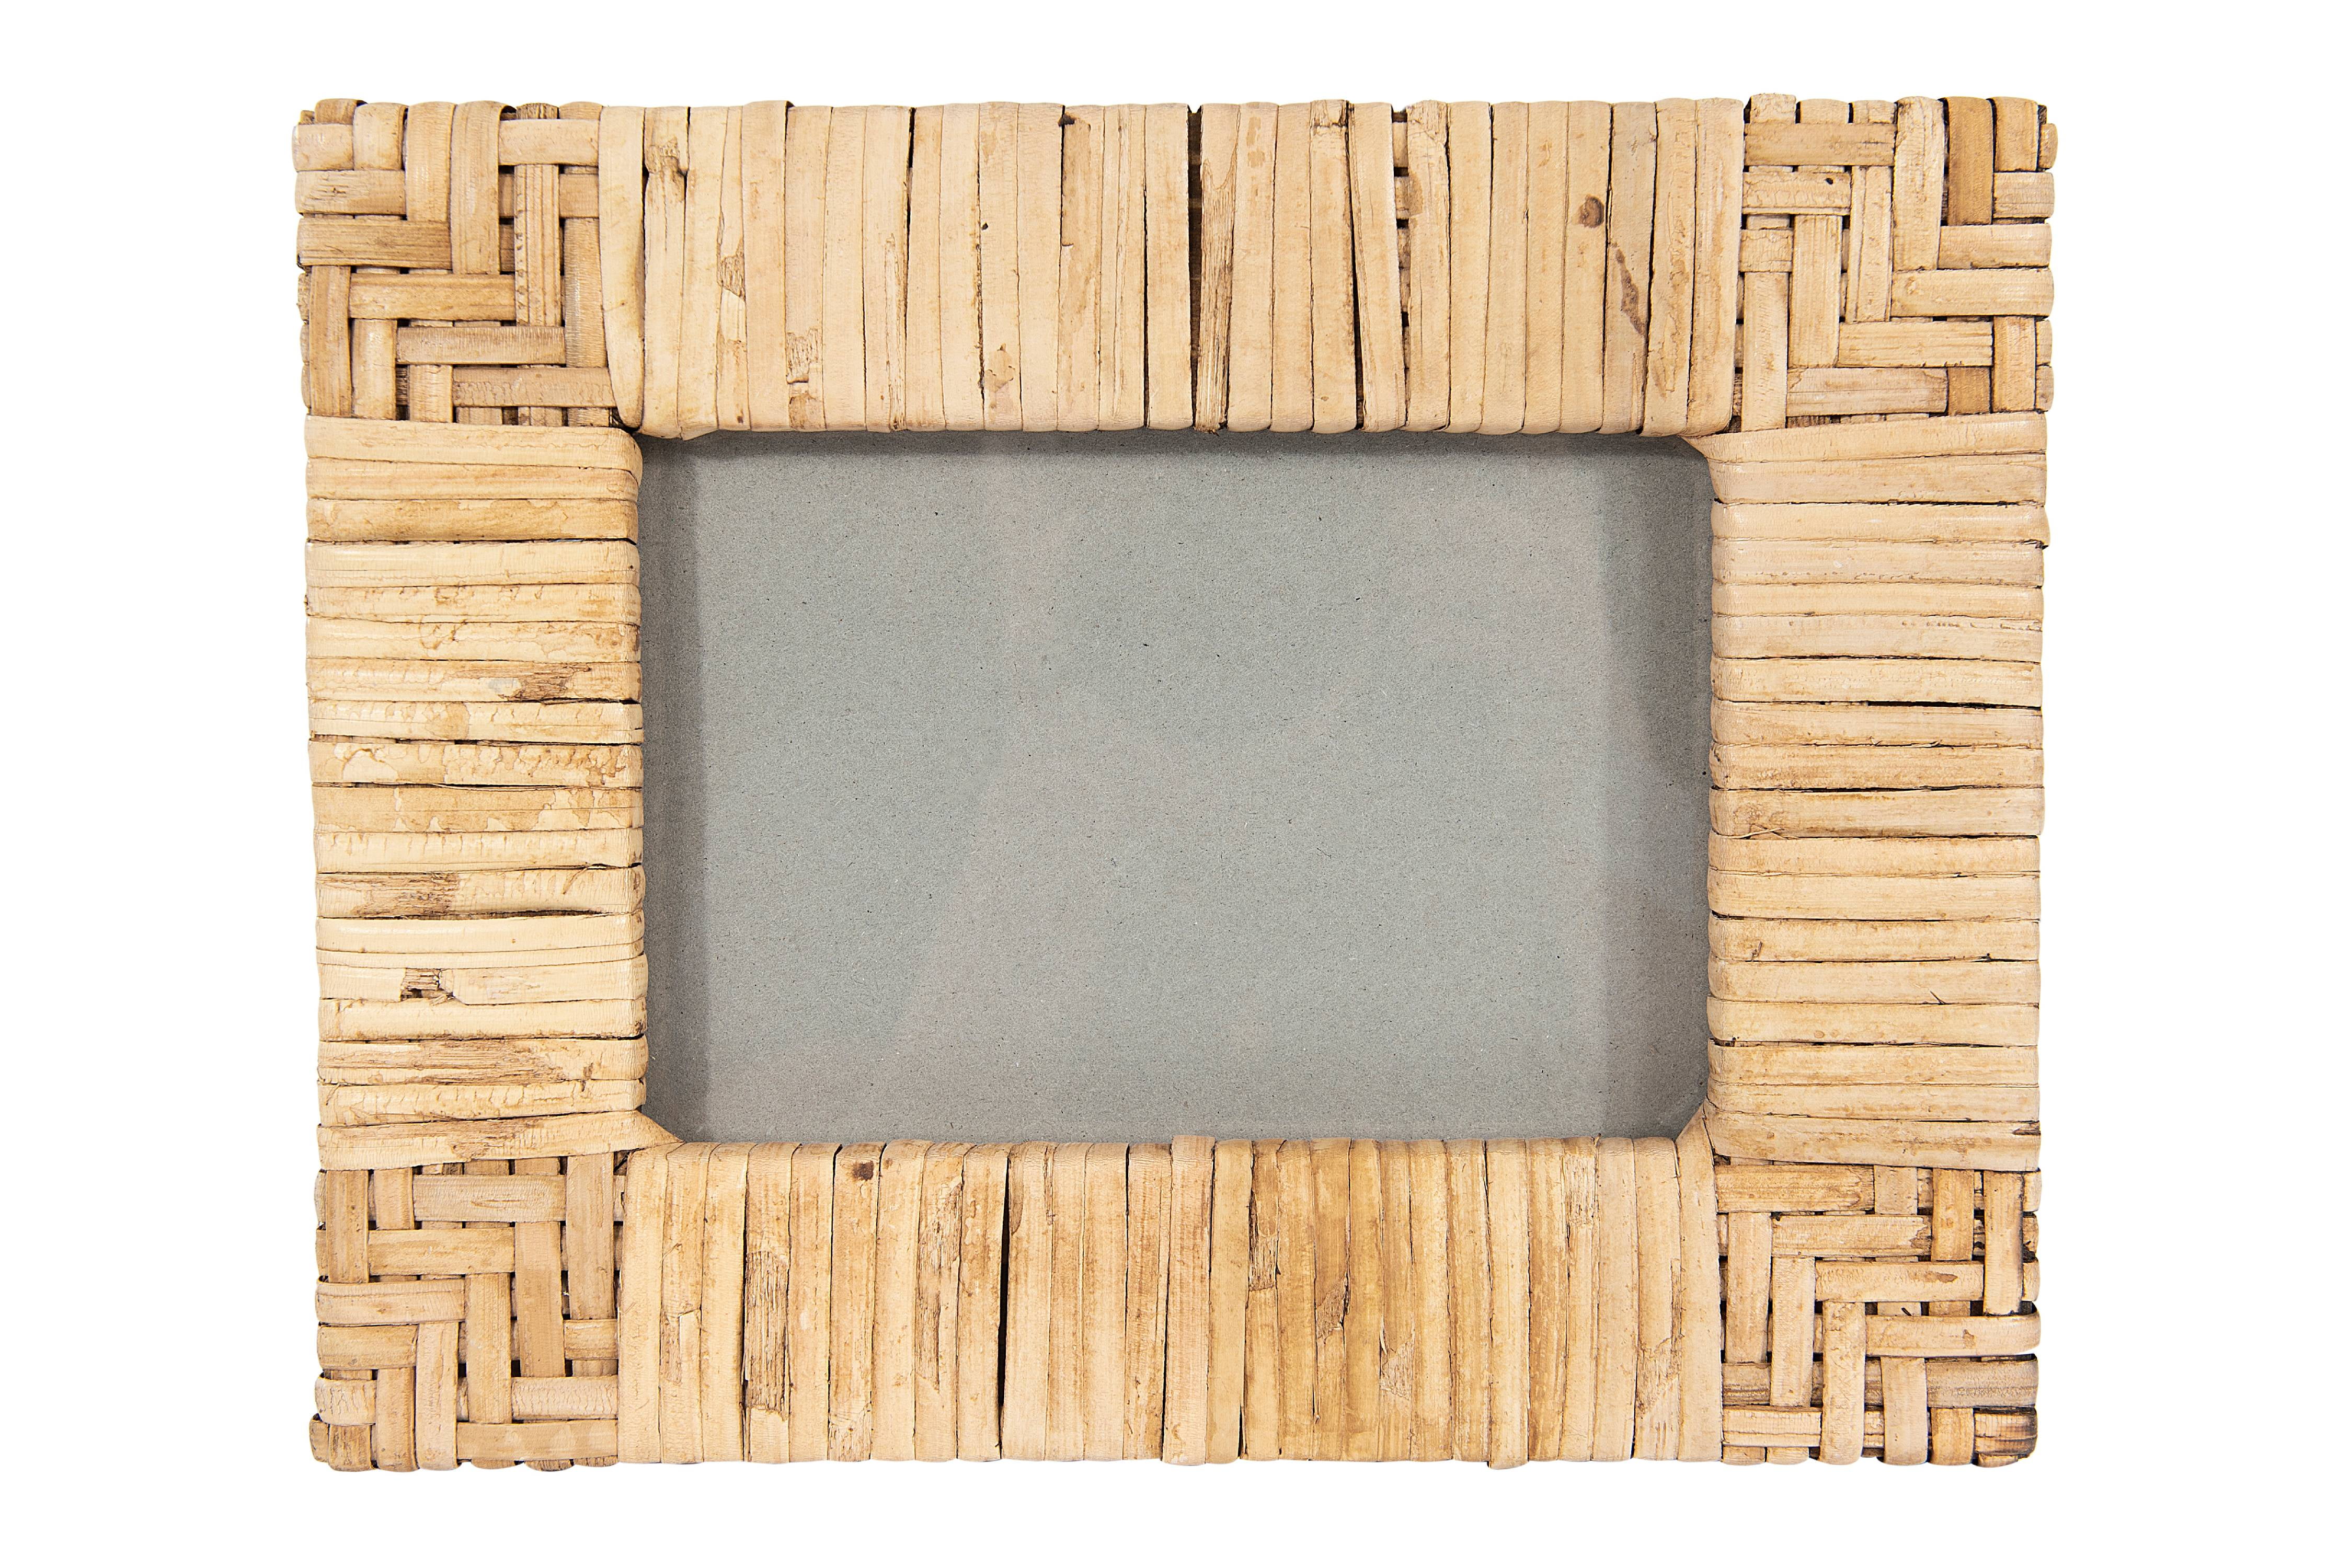 Home Decor Picture Photo Frame Rattan Wood Wicker Carved Woven Texture Brown 4x6 